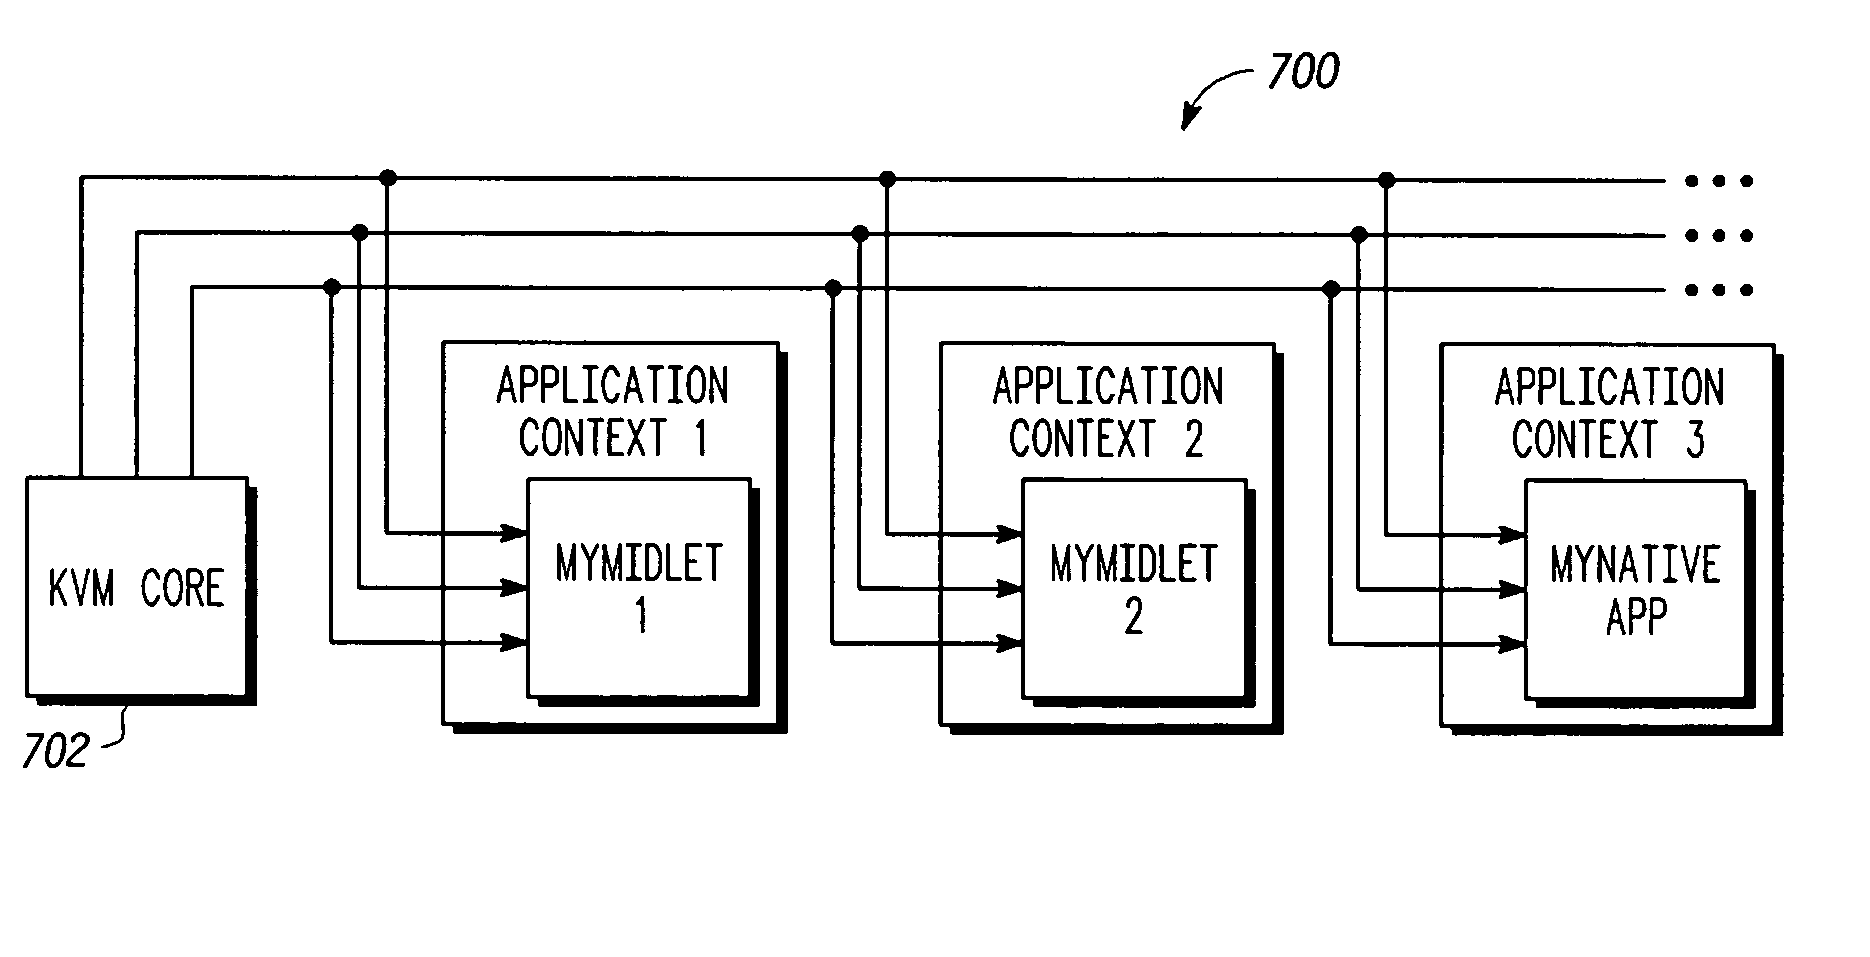 Virtual machine extended capabilities using application contexts in a resource-constrained device